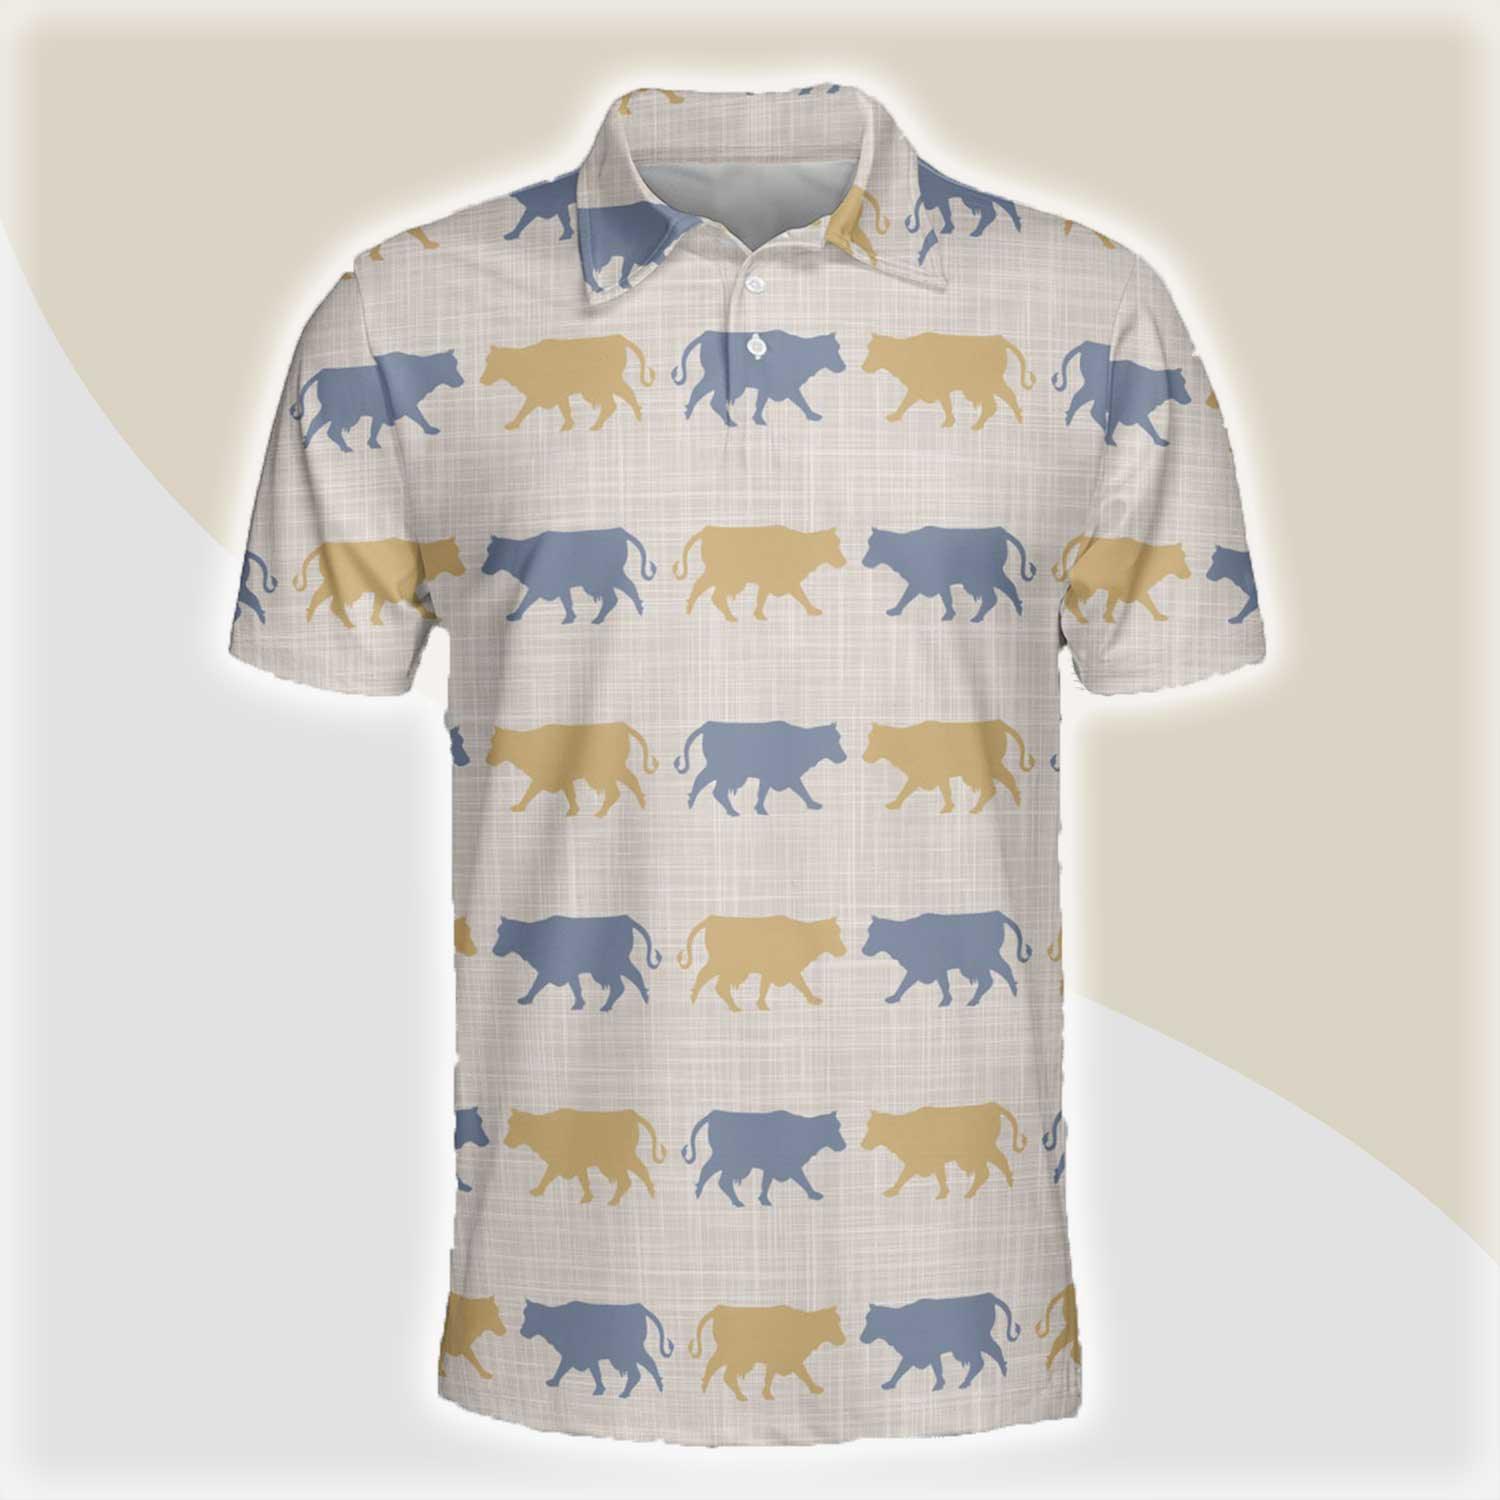 Cow Men Polo Shirts For Summer - Cow Silhouette Pattern Button Shirts For Men - Perfect Gift For Cow Lovers, Cattle Lovers - Amzanimalsgift